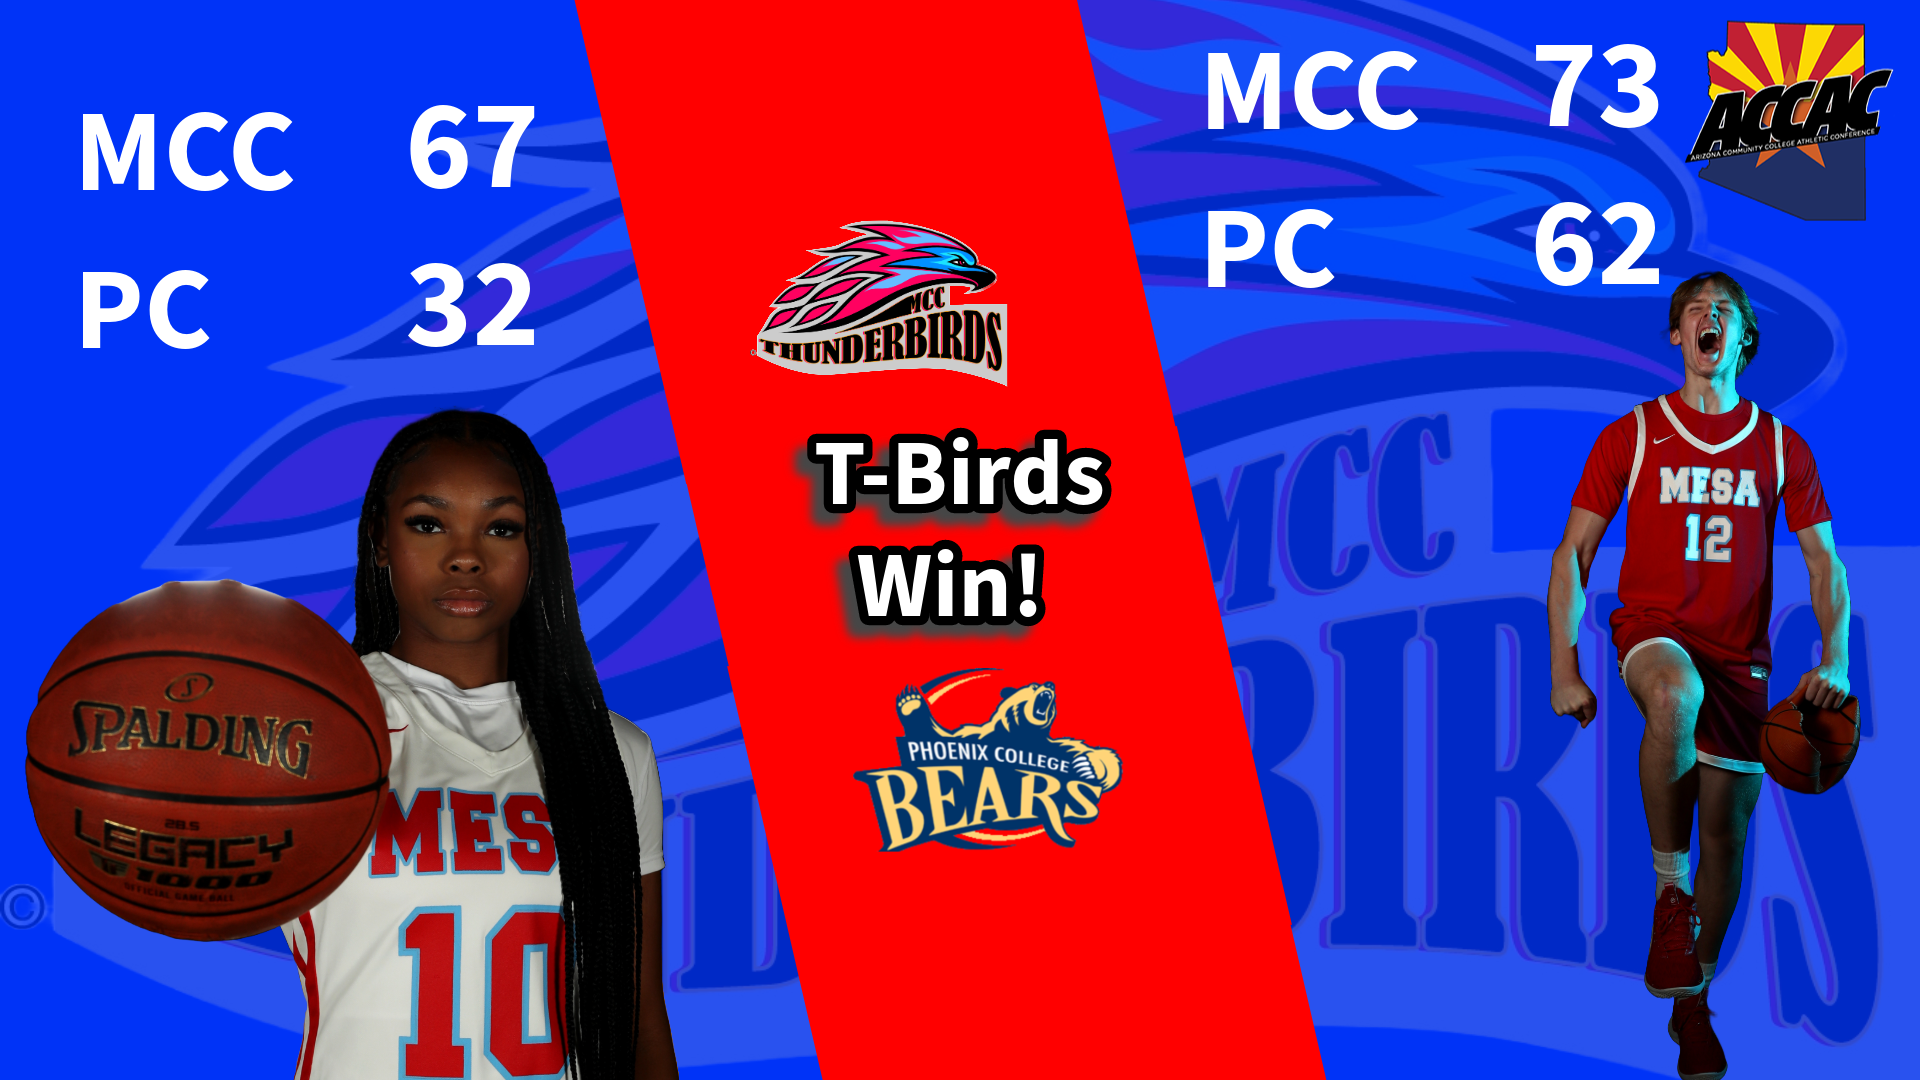 MCC Basketball earns two conference wins over Phoenix College on Wednesday